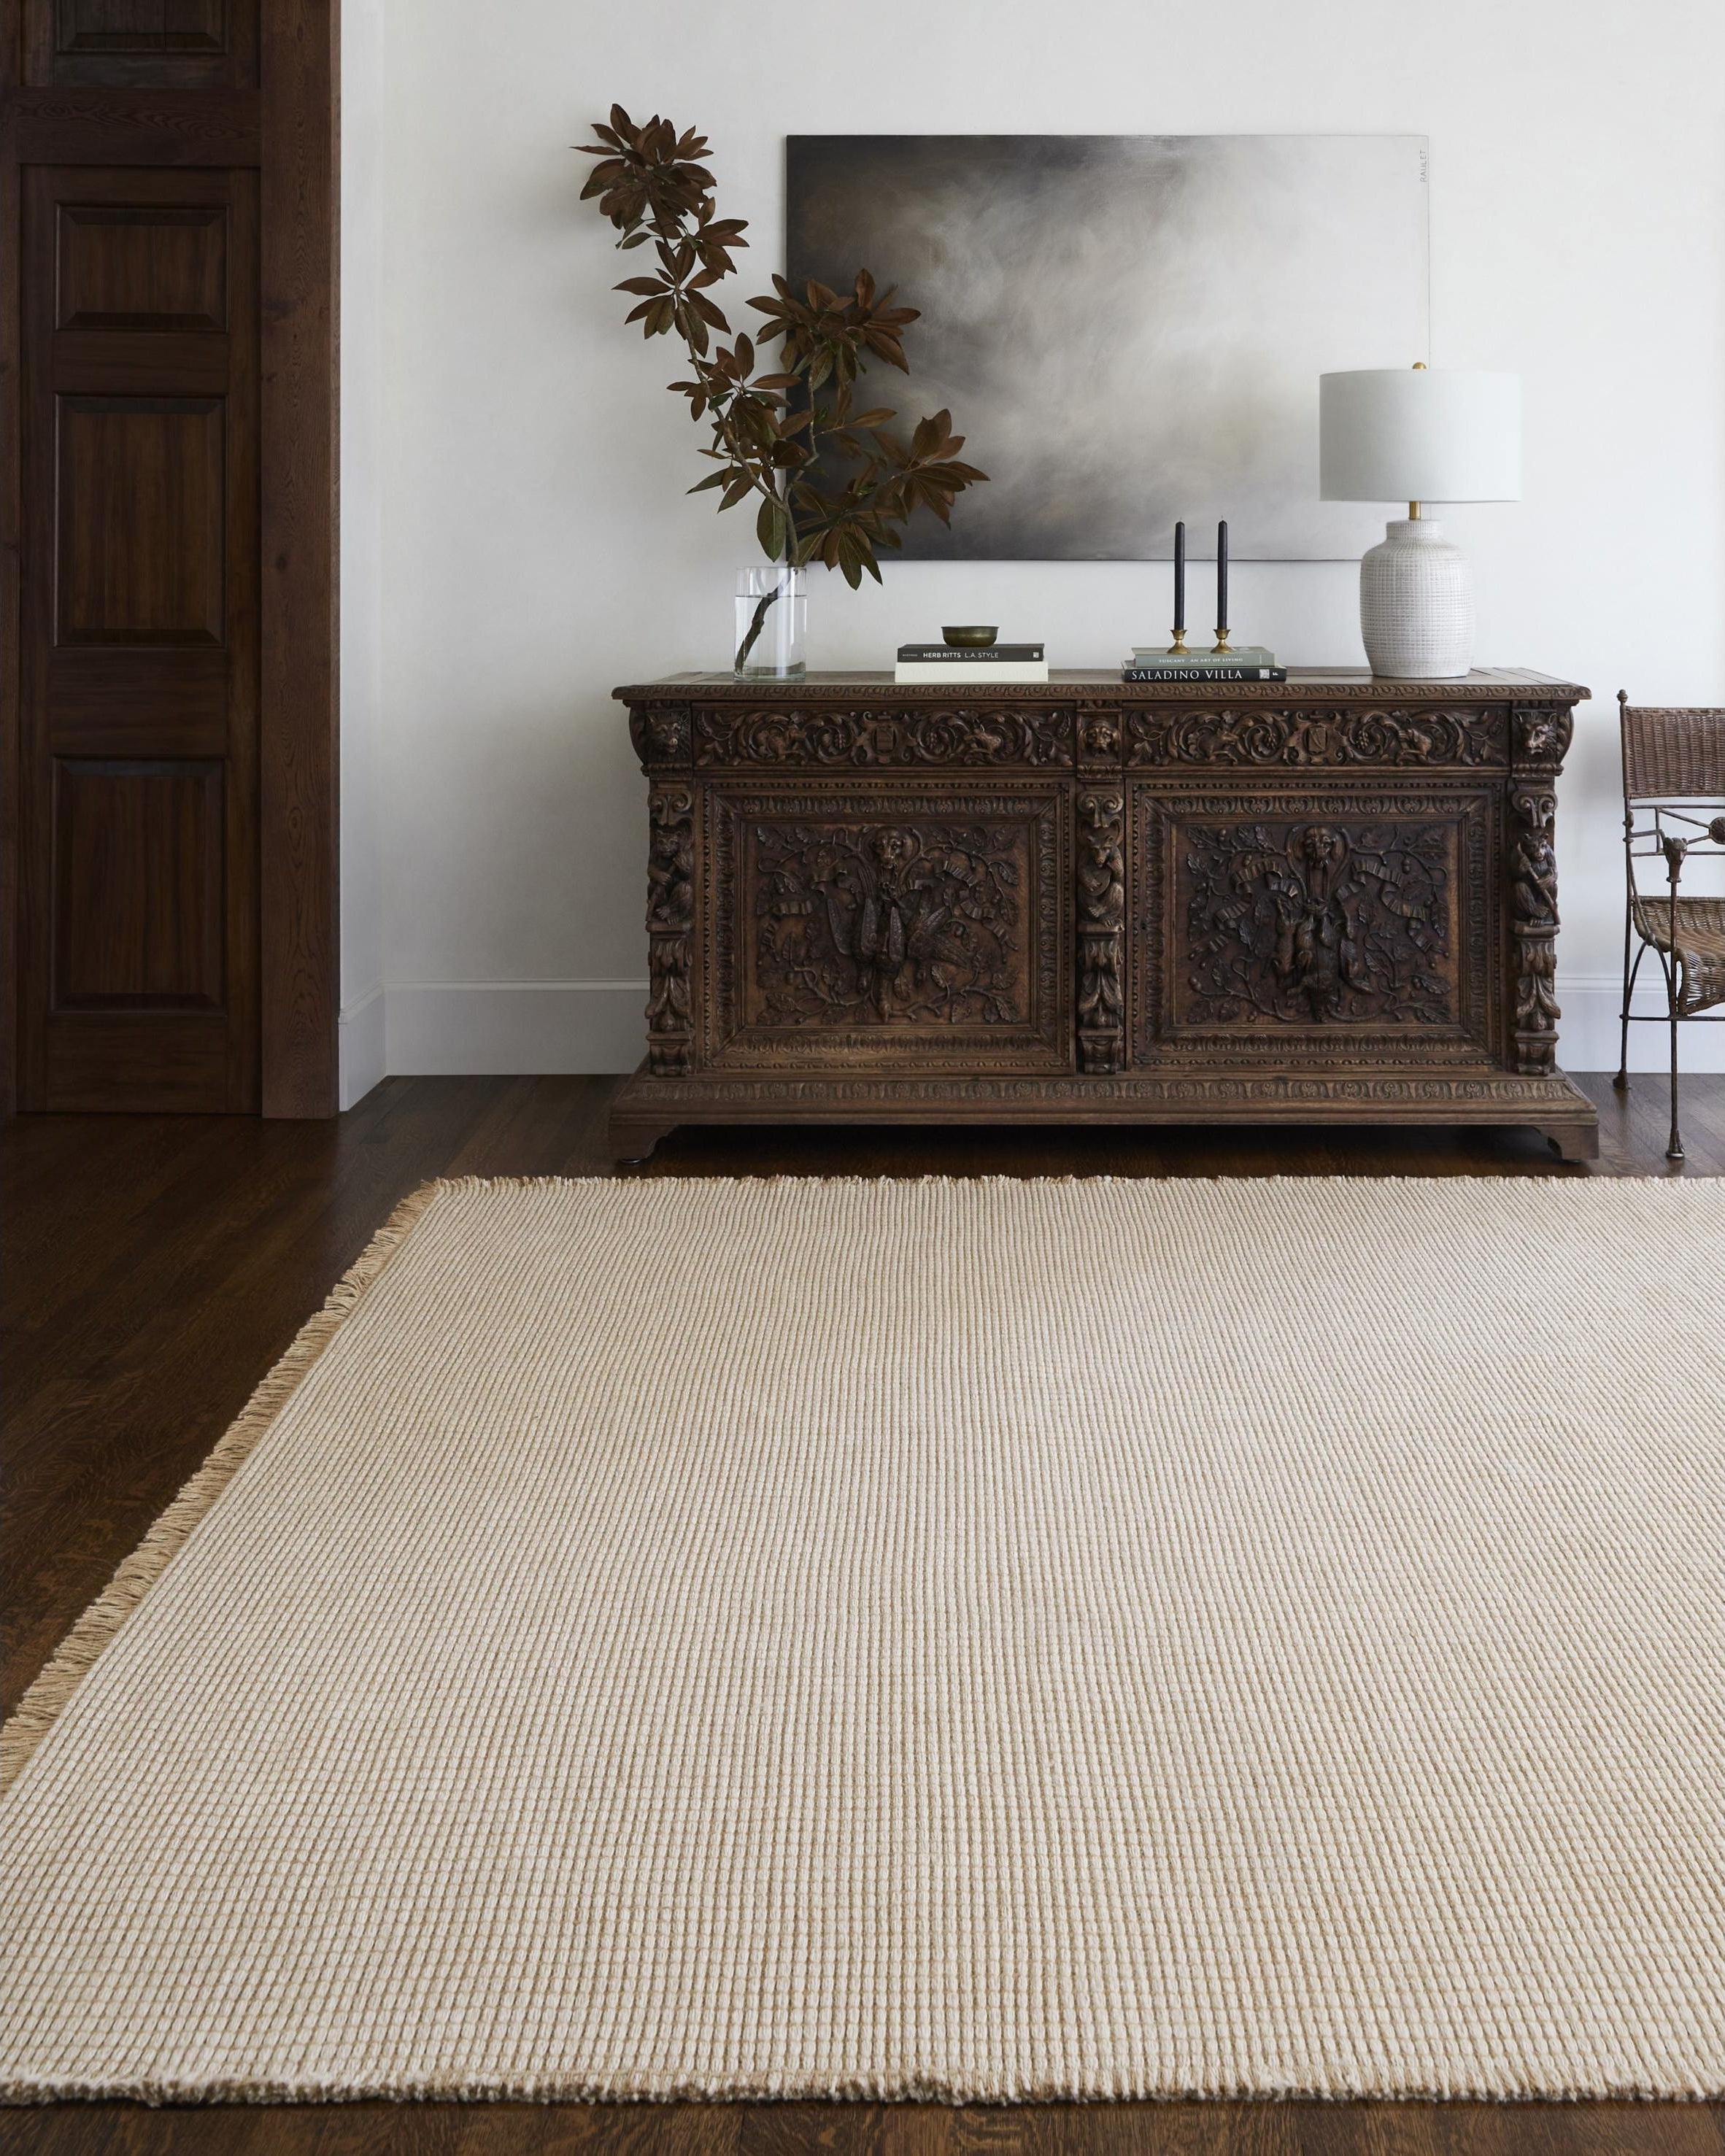 This unique and exquisite Kimi area rug is a special collaboration piece from our Becki Owens x Surya line. The perfect addition to any space, this beautiful rug features a unique stitched design made of polypropylene and jute. Amethyst Home provides interior design, new home construction design consulting, vintage area rugs, and lighting in the Omaha metro area.